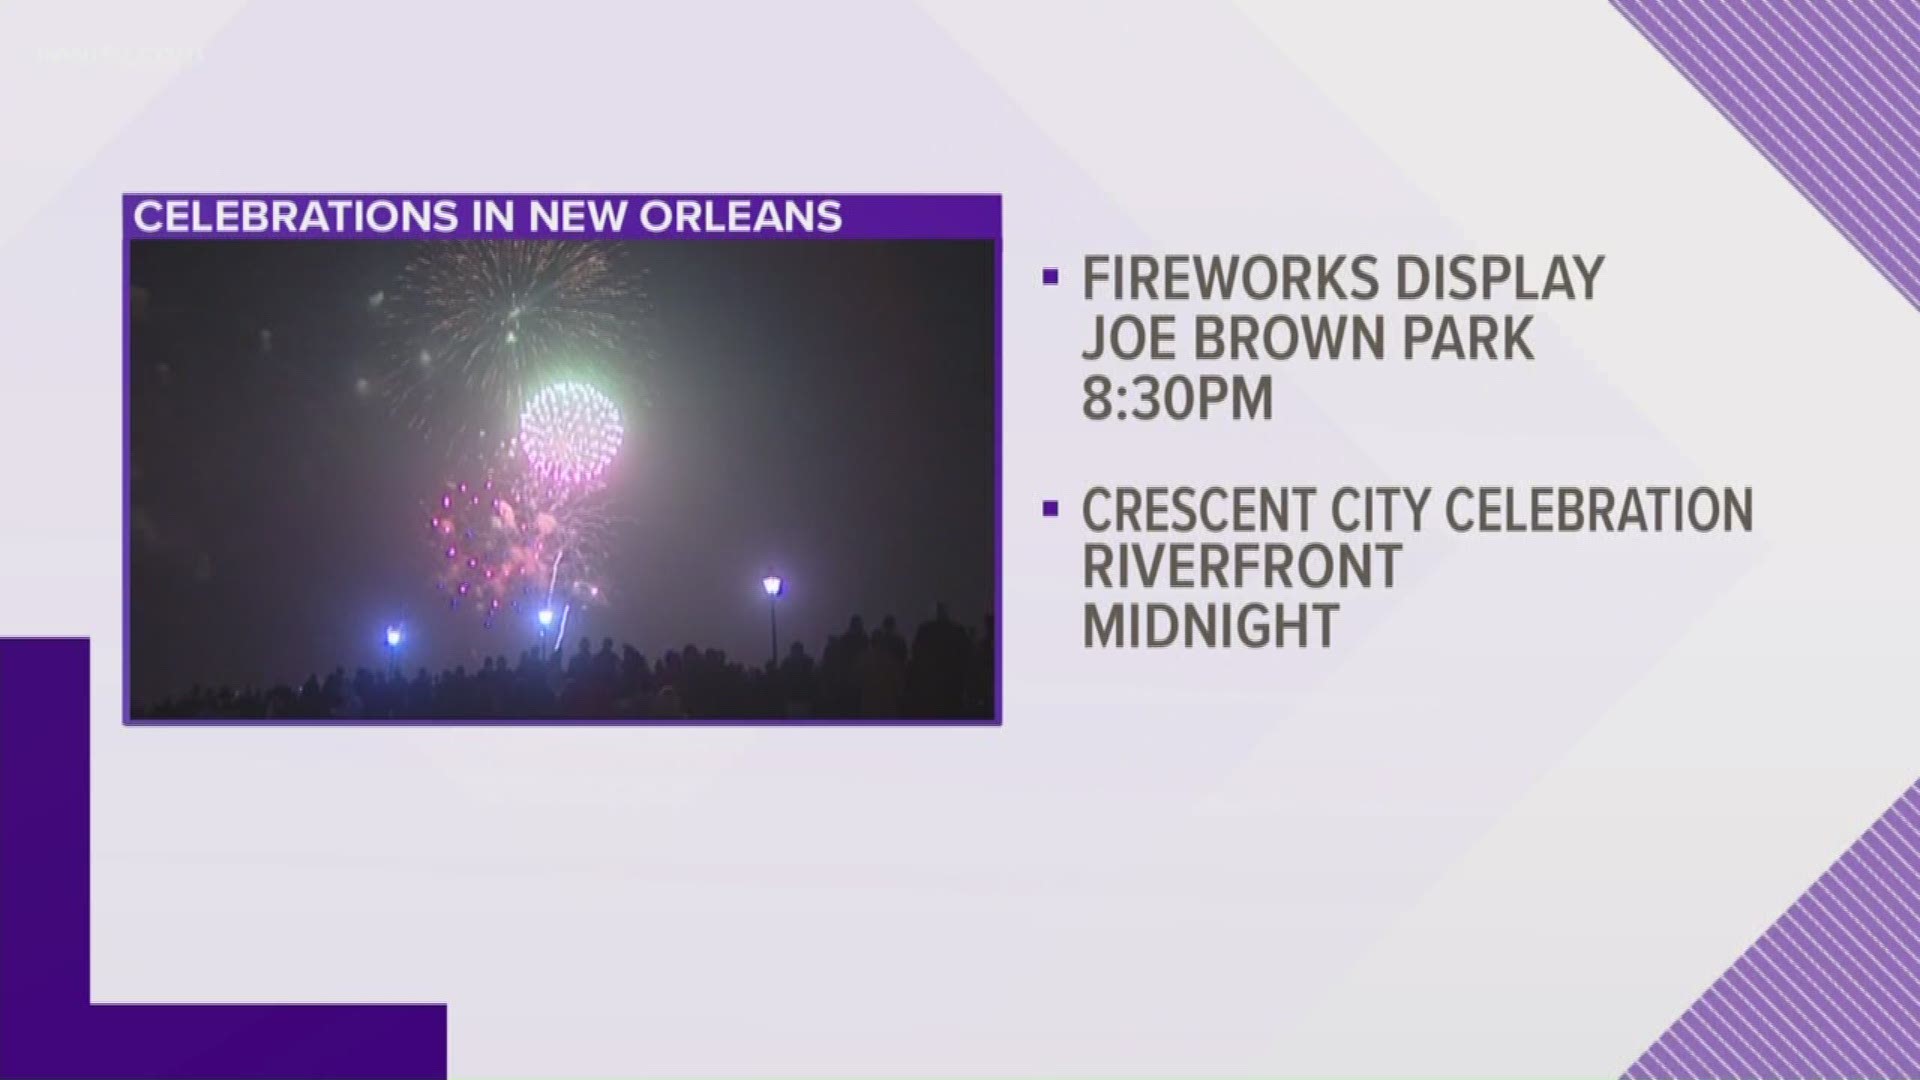 Here's what you need know about fireworks, the Sugar Bowl and all things New Orleans for New Year's Eve and New Year's Day.